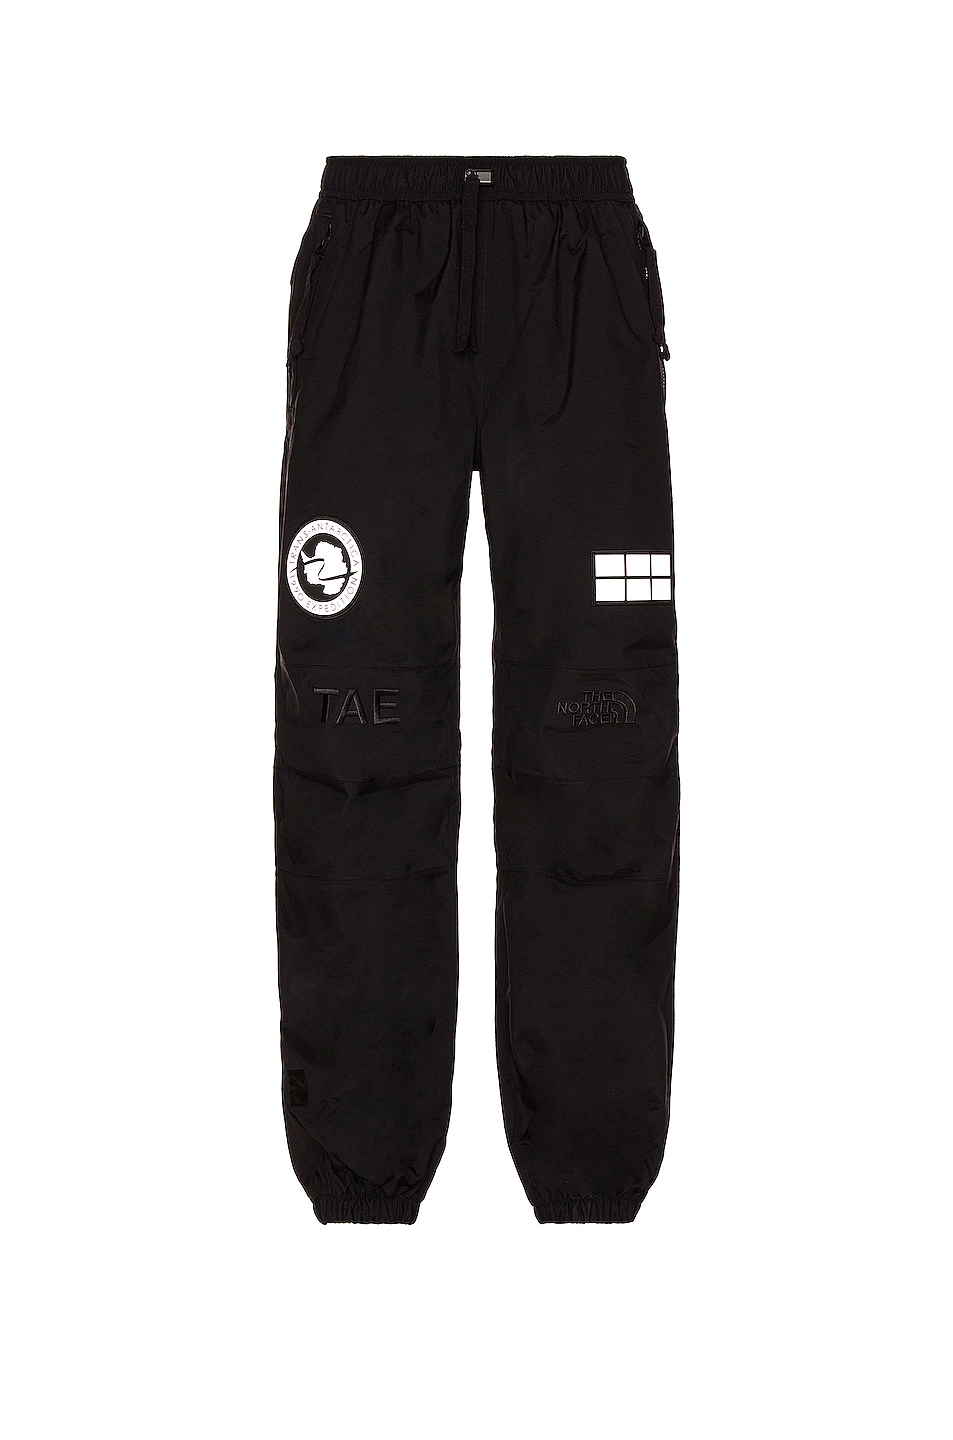 Image 1 of The North Face CTAE Pant in Black